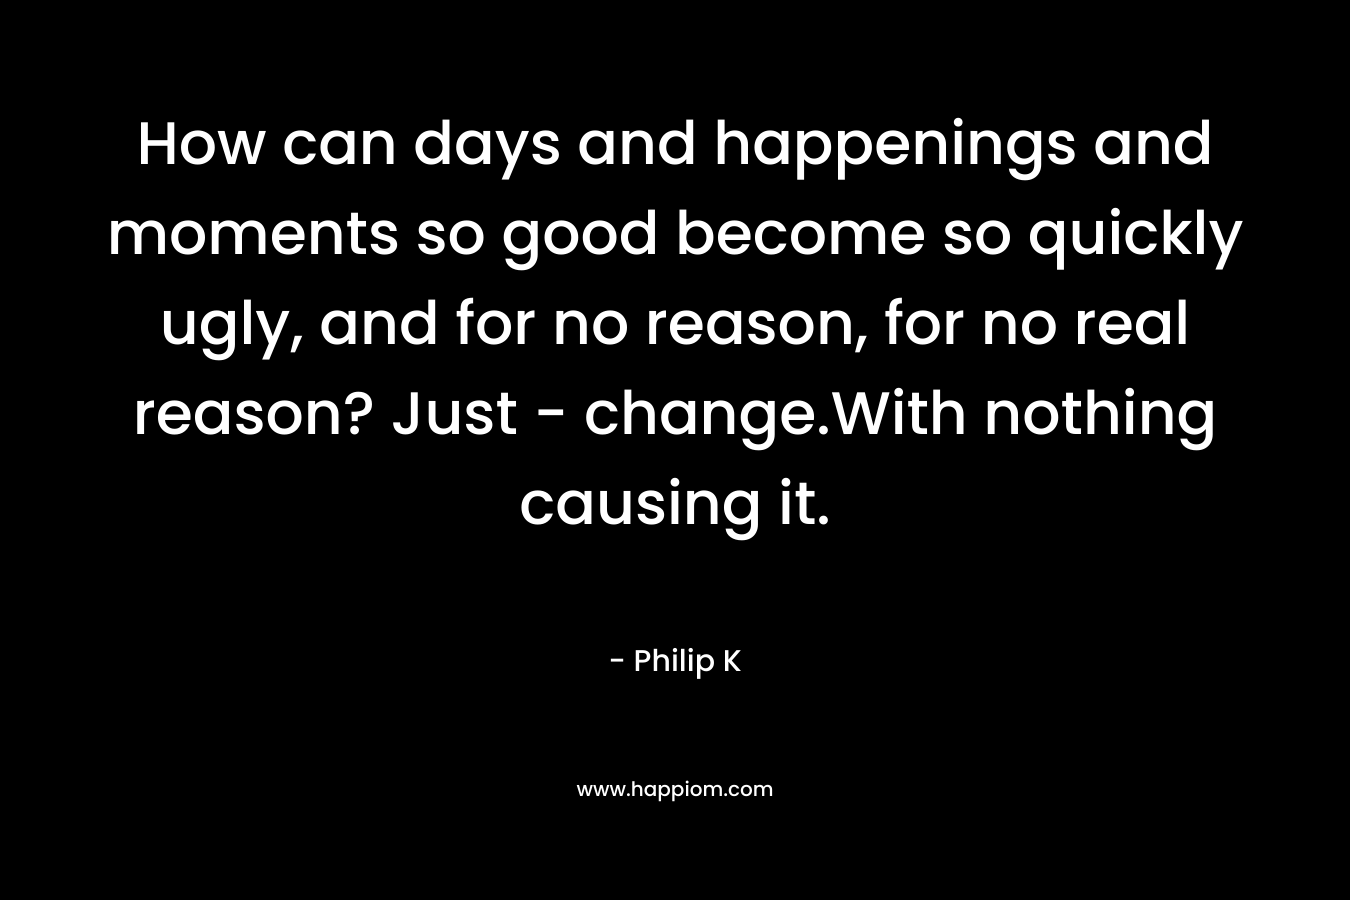 How can days and happenings and moments so good become so quickly ugly, and for no reason, for no real reason? Just – change.With nothing causing it. – Philip K